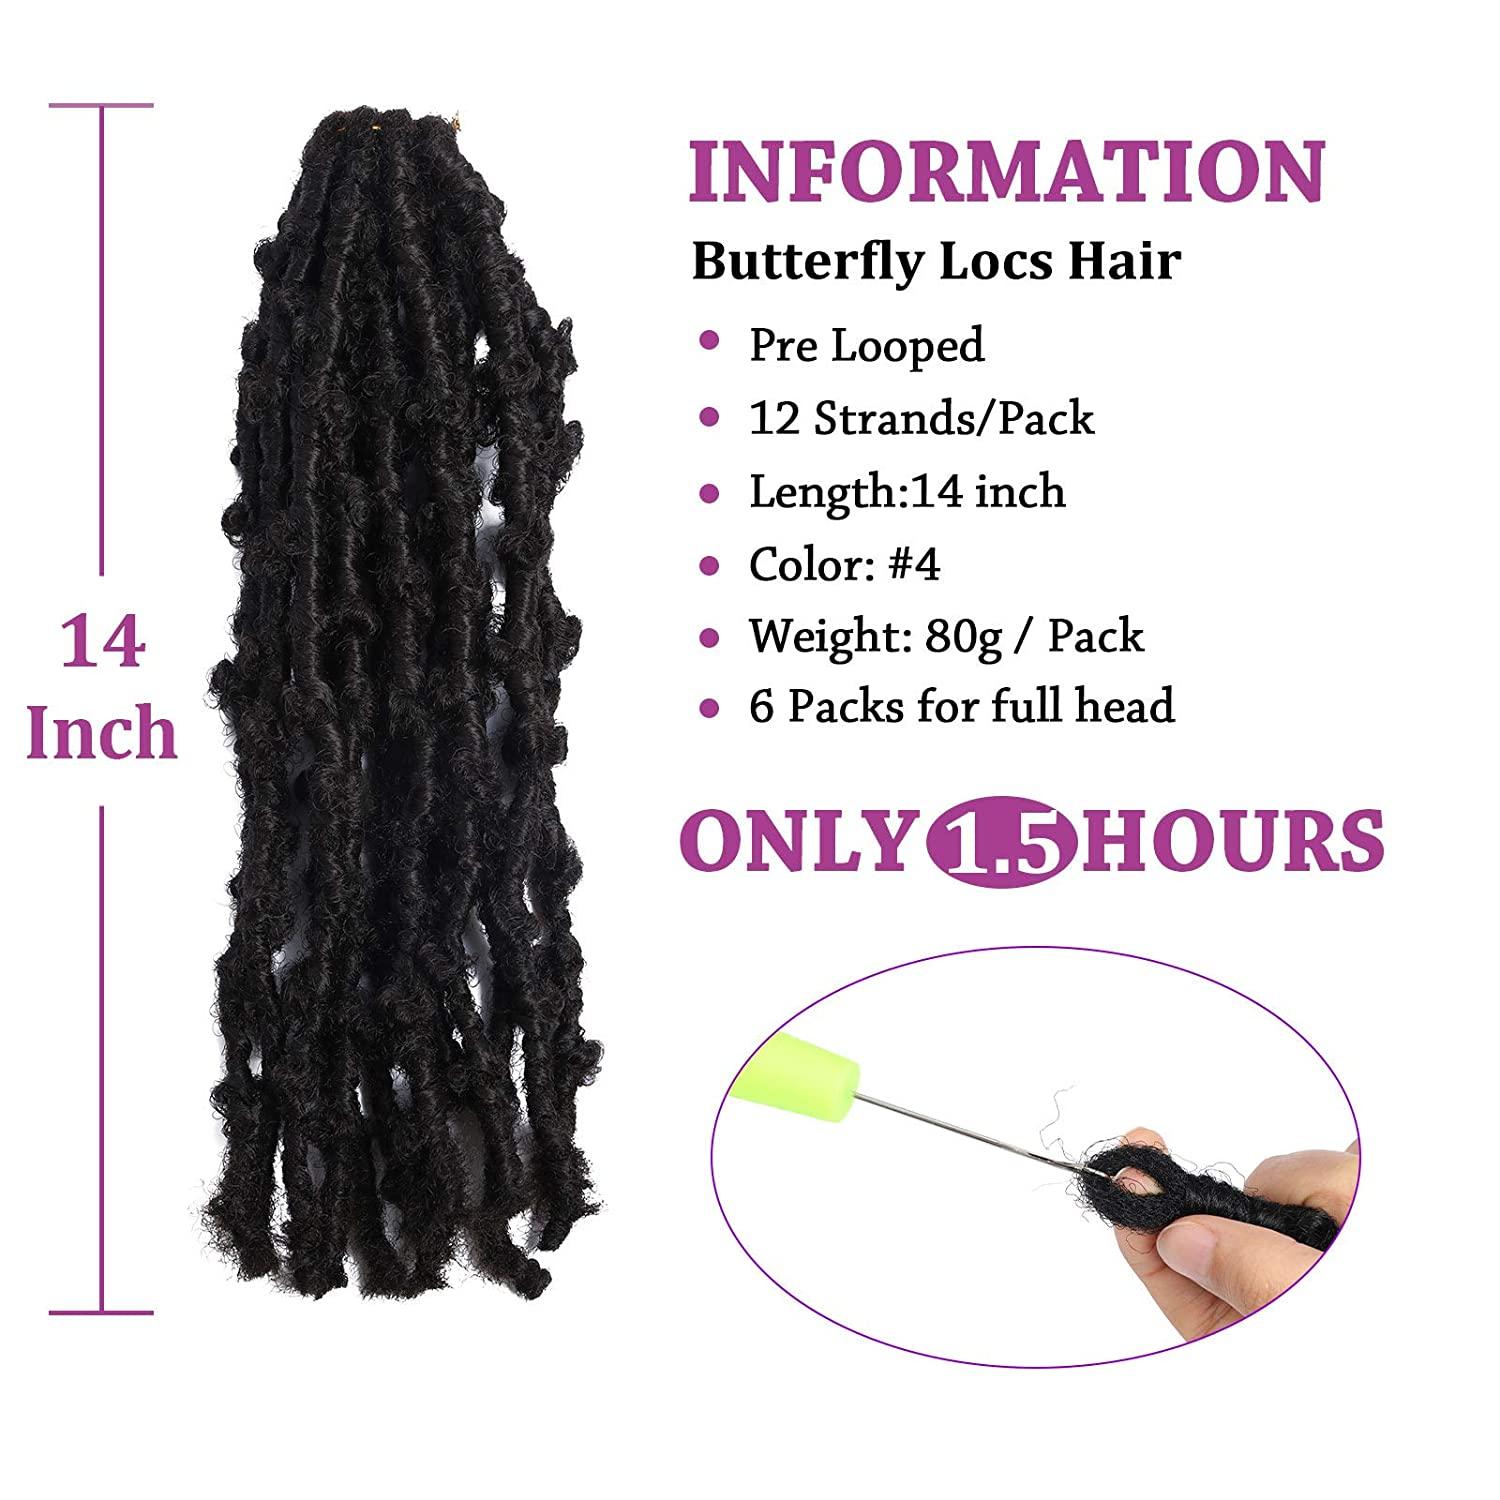 6 Pack Butterfly Locs Hair 14 Inch Pre Looped Distressed Butterfly Locs Crochet  Hair Short Soft Butterfly Locs Crochet Braid Hair Extensions(#4) 14 Inch  (Pack of 6) #4